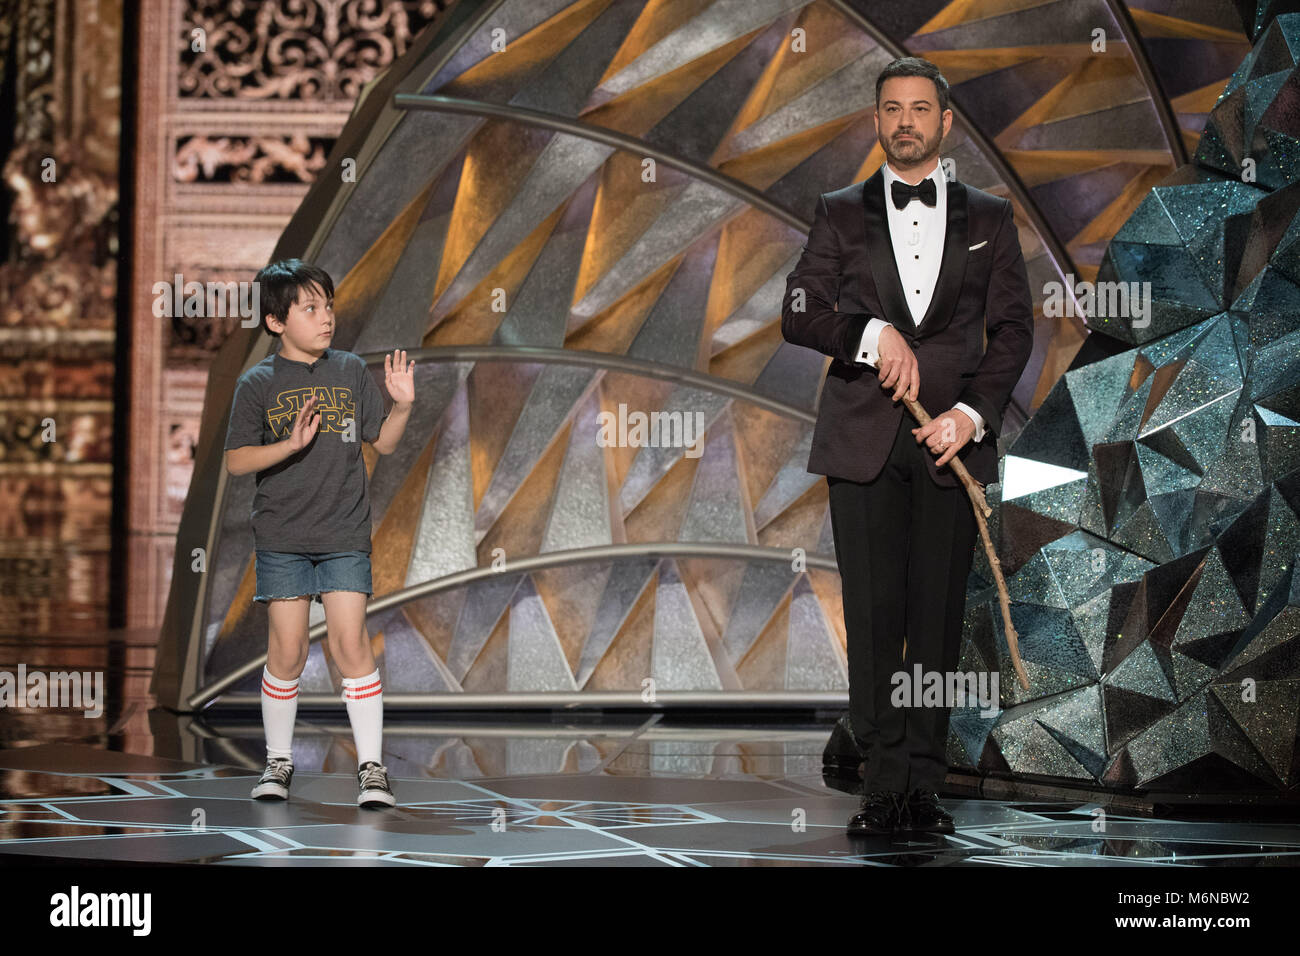 Hollywood, CA, USA. 4th Mar, 2018. 04 March 2018 - Hollywood, California - ''Young Jimmy Kimmel'' and Jimmy Kimmel. 90th Annual Academy Awards presented by the Academy of Motion Picture Arts and Sciences held at the Dolby Theatre. Photo Credit: A.M.P.A.S./AdMedia Credit: A.M.P.A.S/AdMedia/ZUMA Wire/Alamy Live News Stock Photo